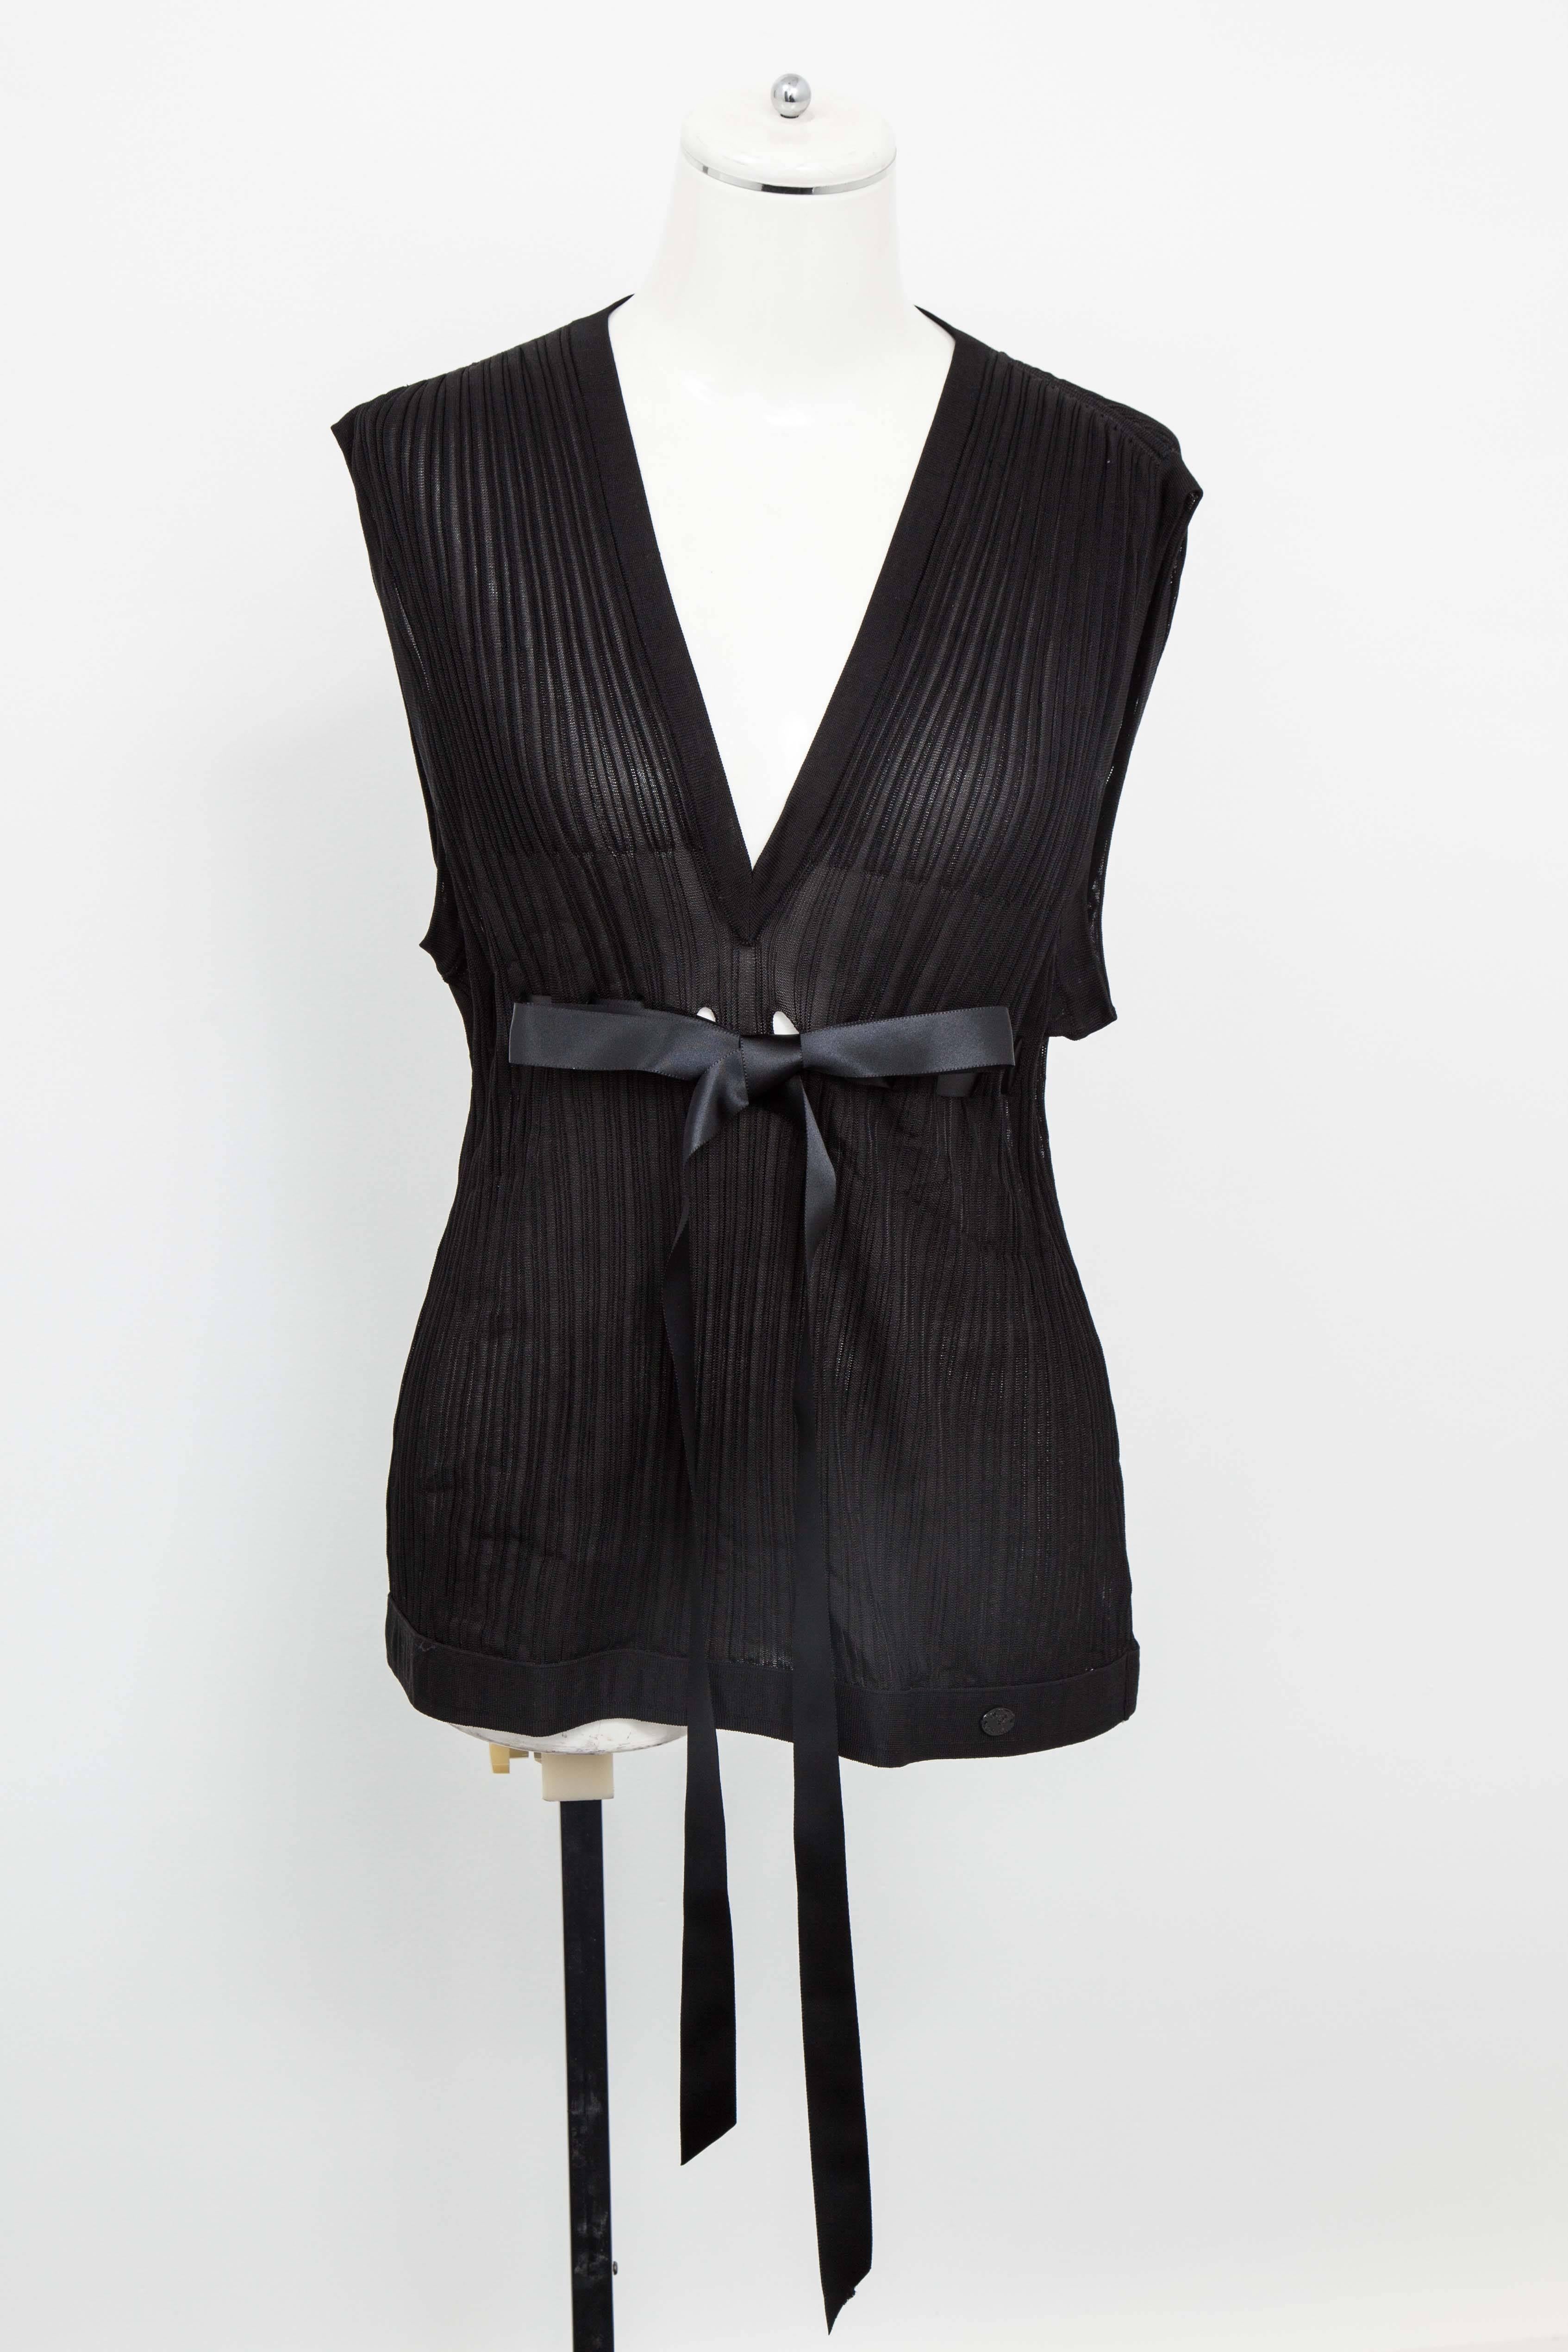 Chanel Black Sleeveless Knit Top with Bow 1